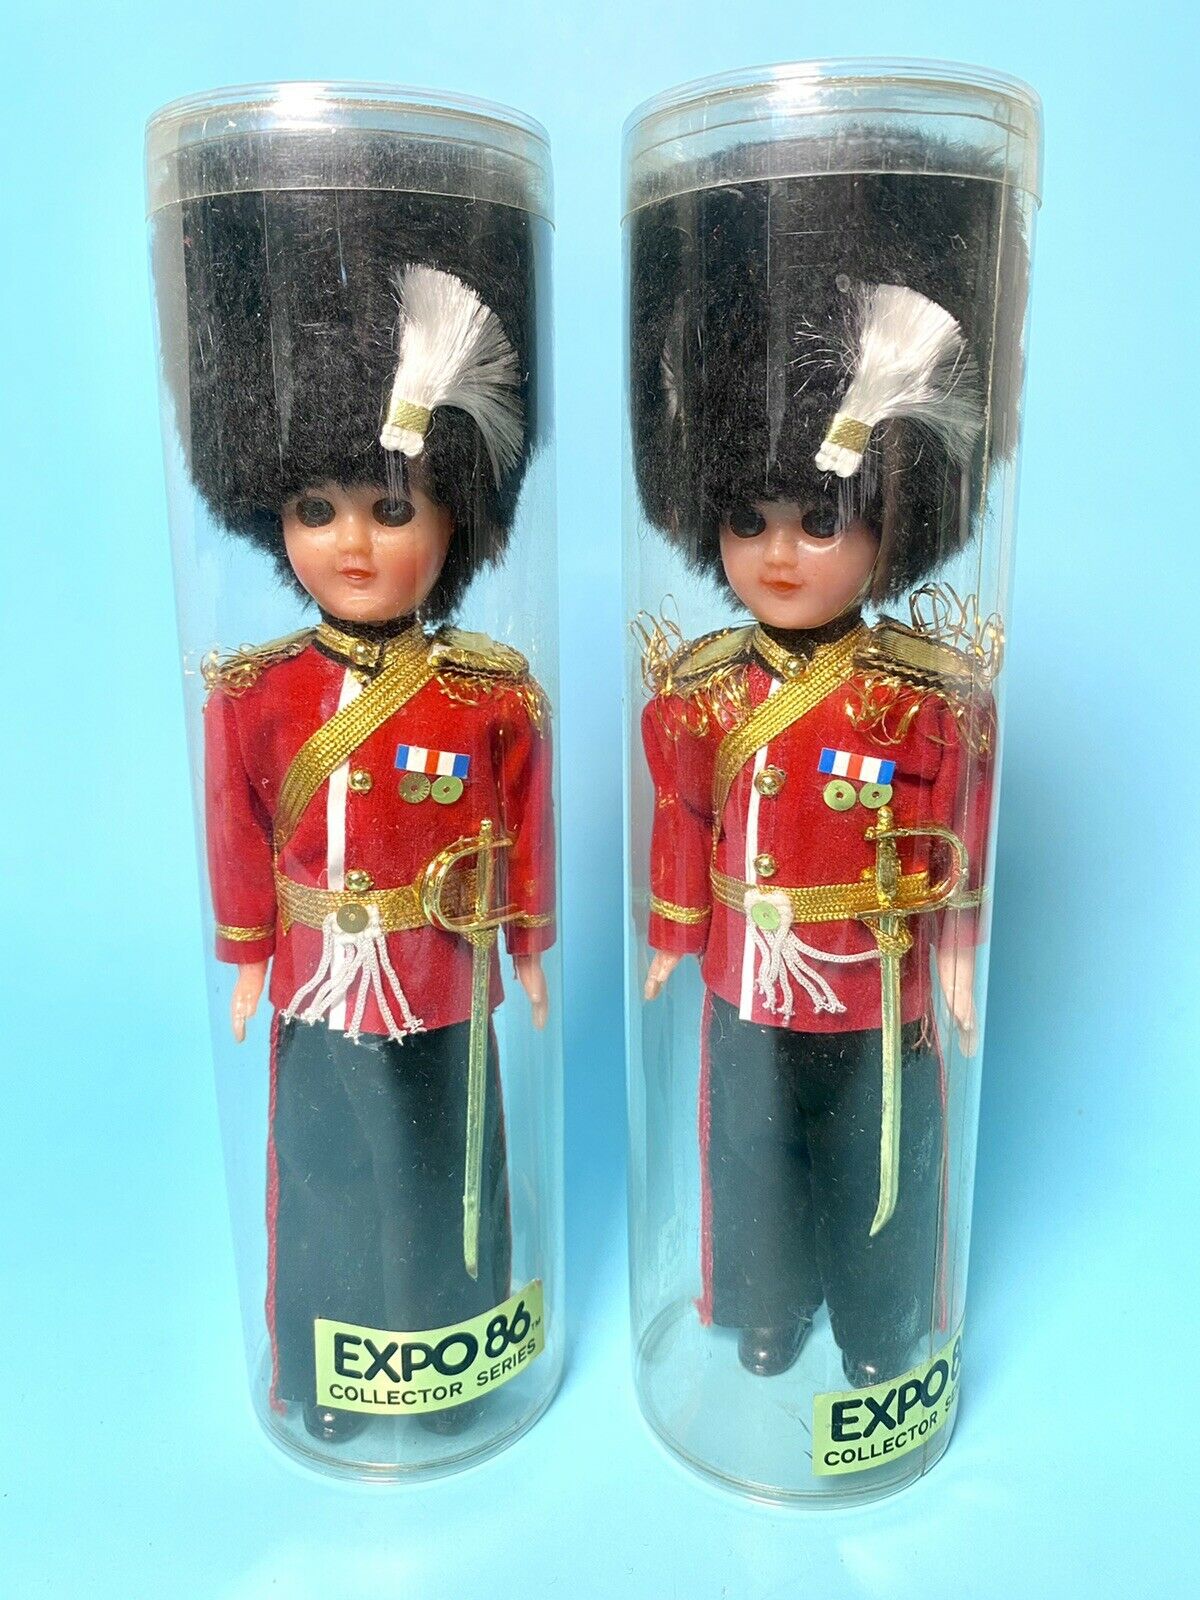 Pair Of Vintage Expo86 British Royal Guard Soldier Celluloid Dolls Eyes Blink 8"